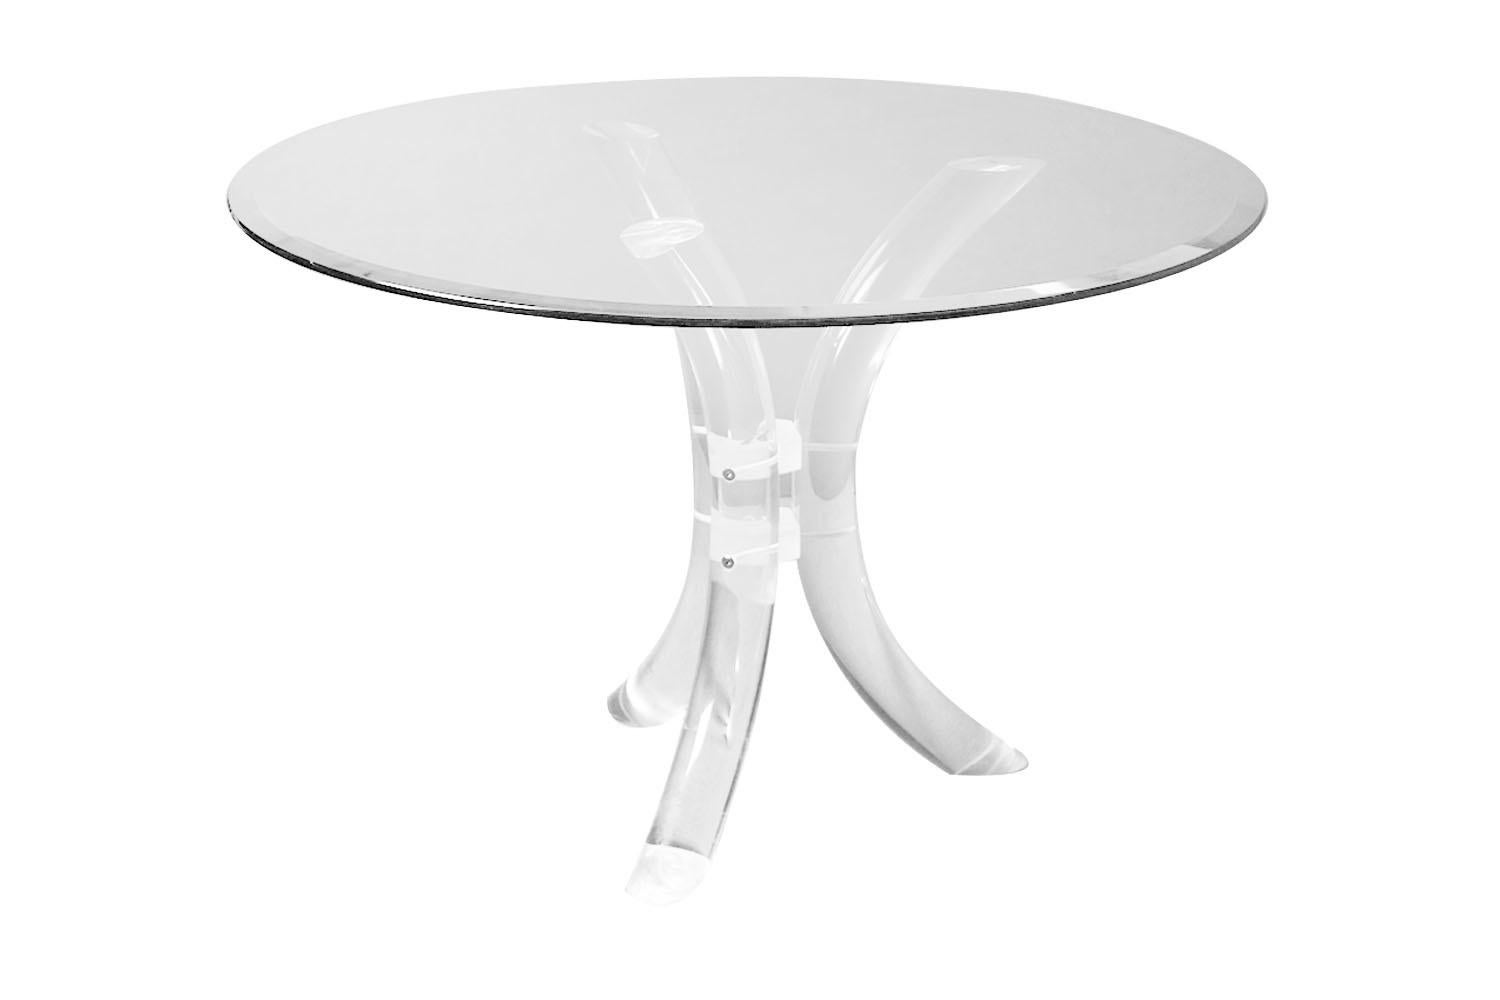 Mid-Century Modern Charles Hollis Jones Style Midcentury Glass Lucite Dining Table by Hill Mfg.